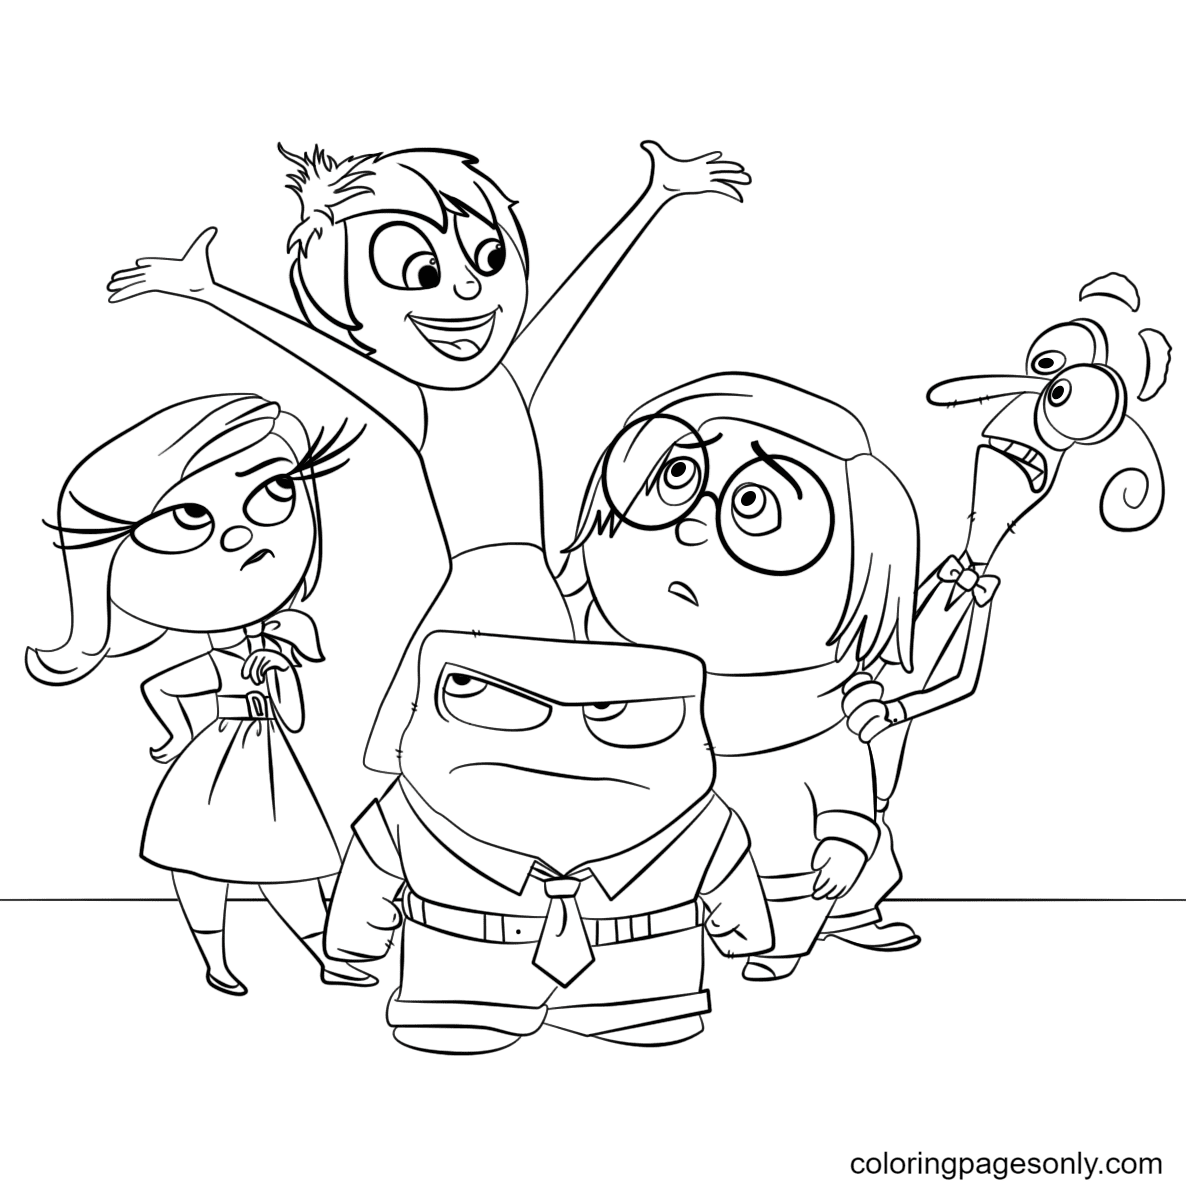 Inside Out All Characters Coloring Pages - Inside Out Coloring Pages ...